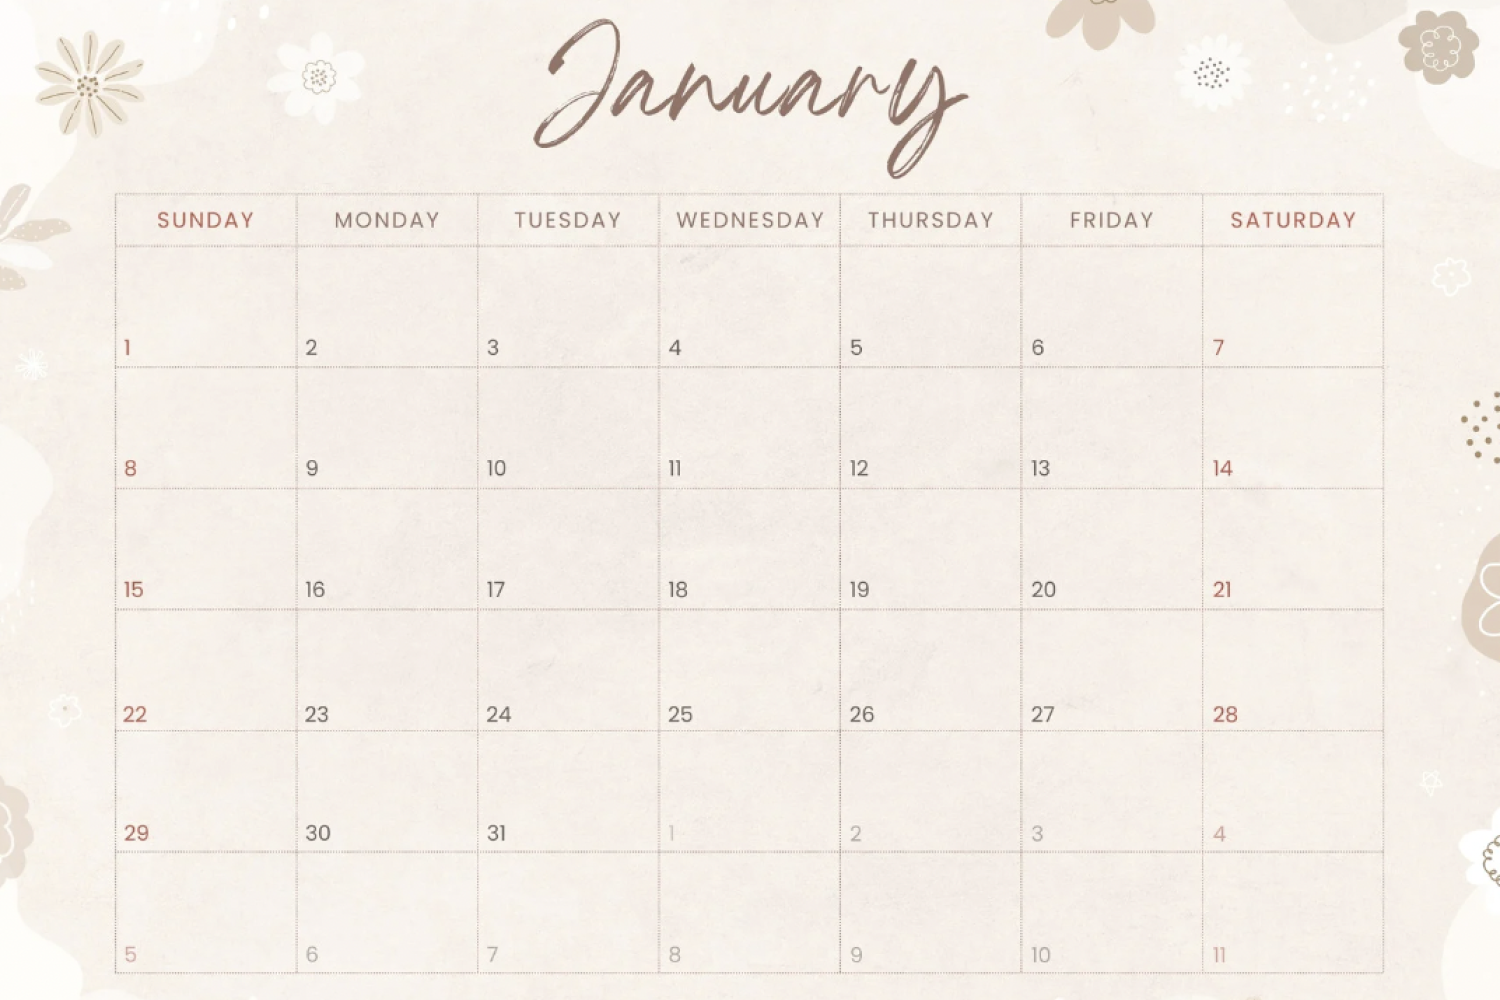 January calendar with beige background and flowers.